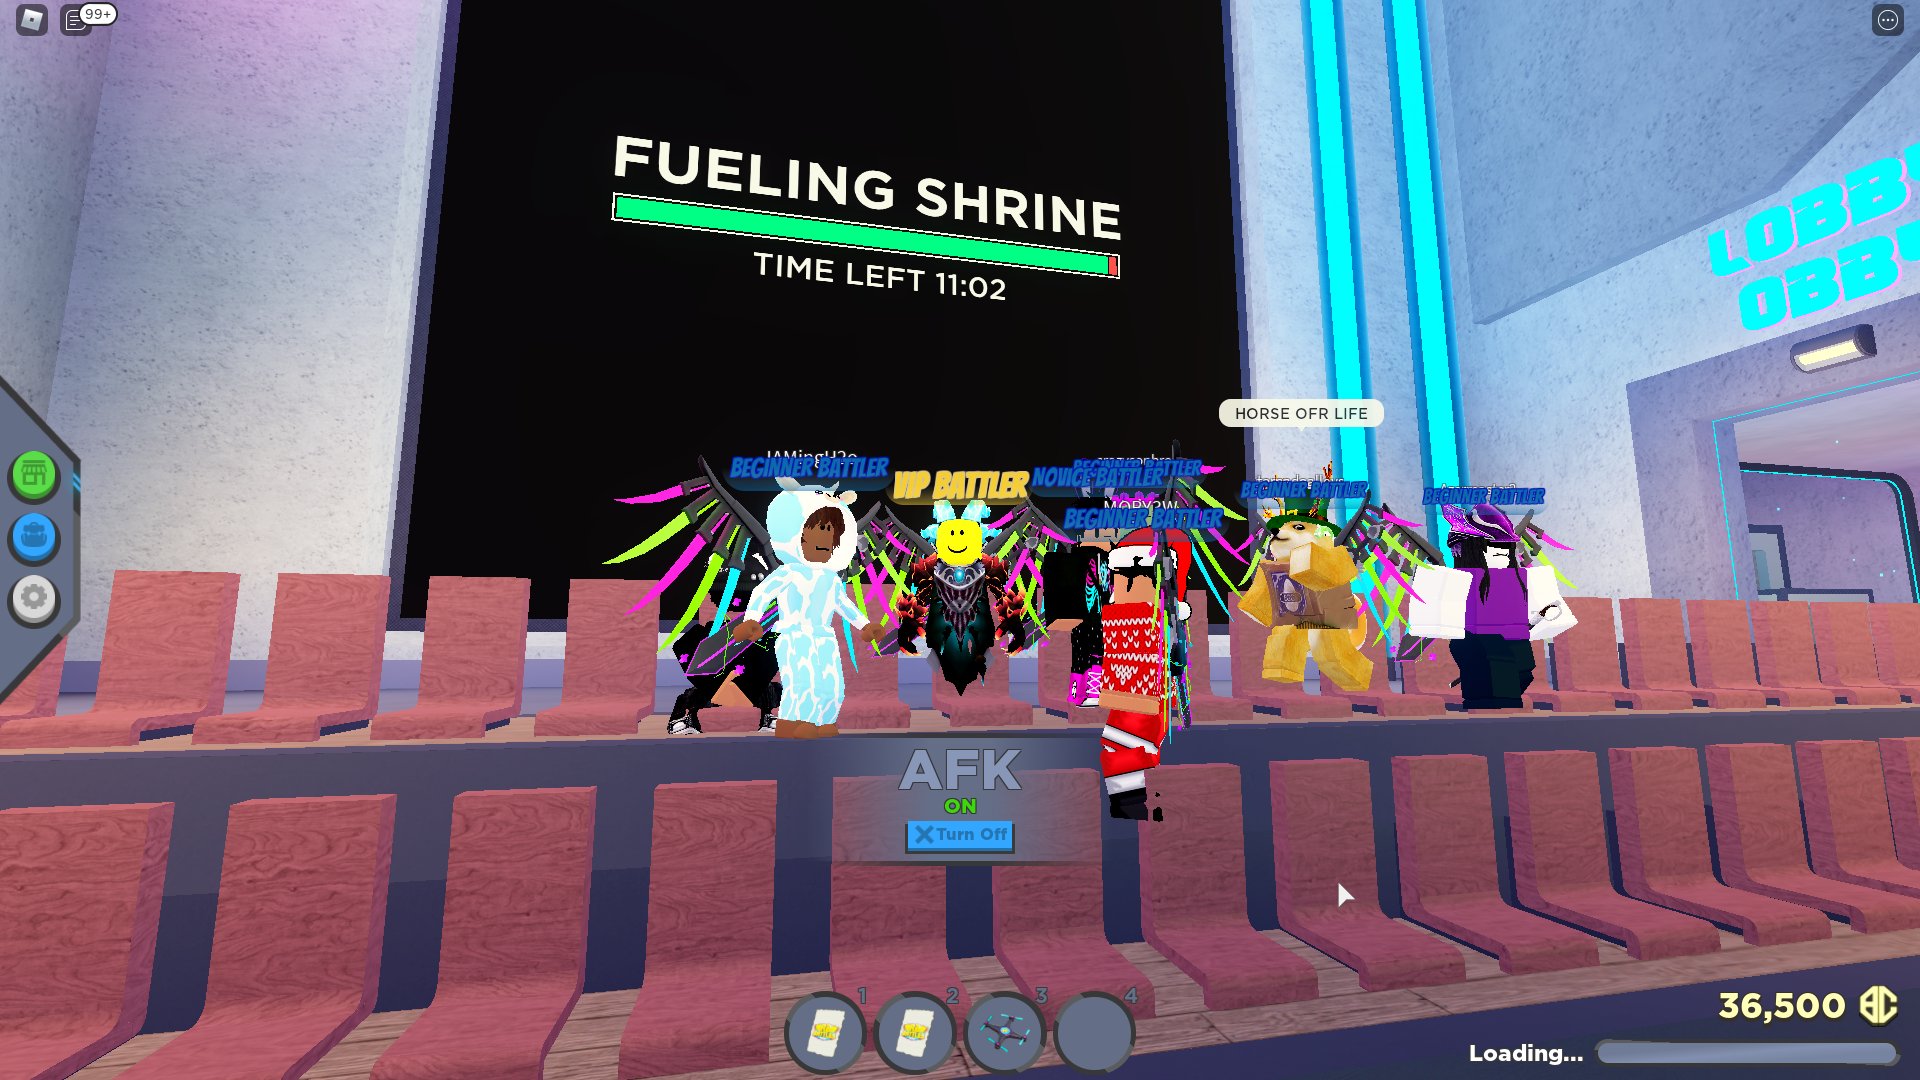 KreekCraft on X: #Roblox LIVE right now!